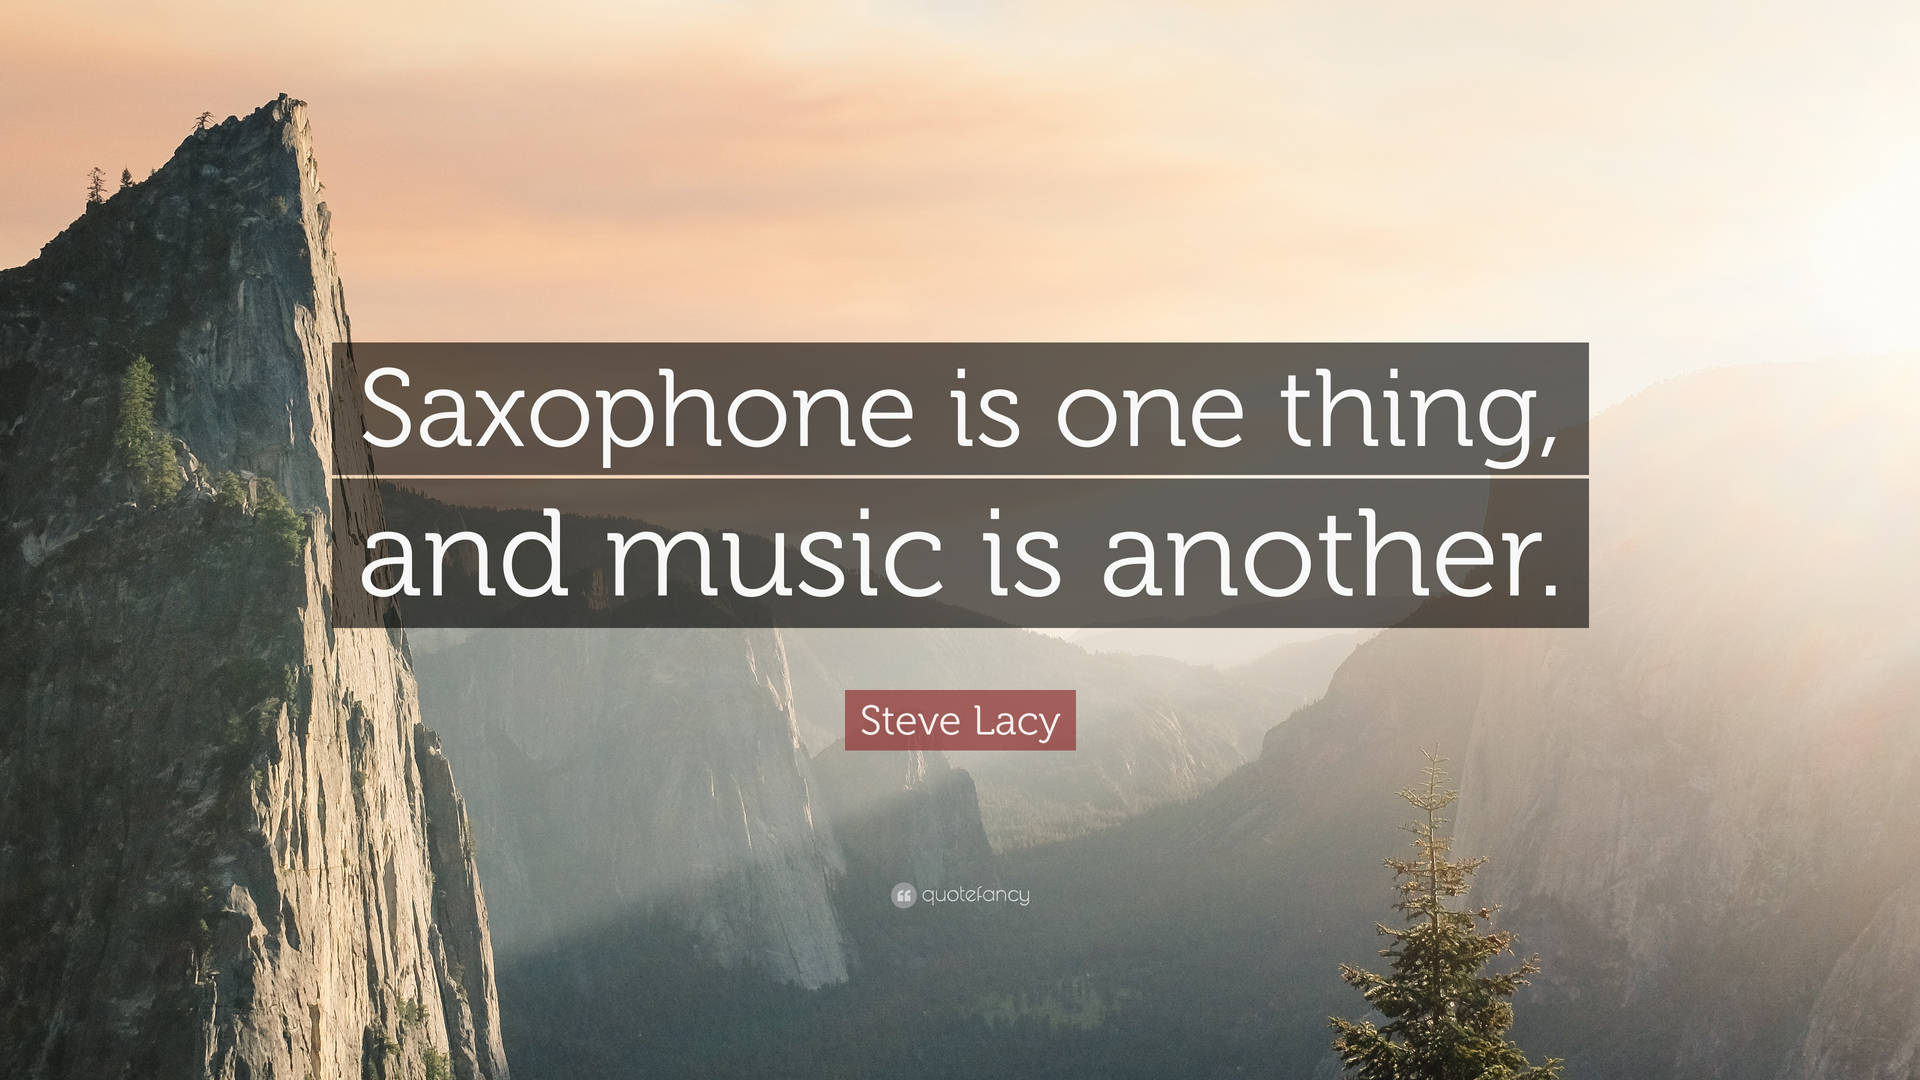 Steve Lacy Quote Cliff View Background